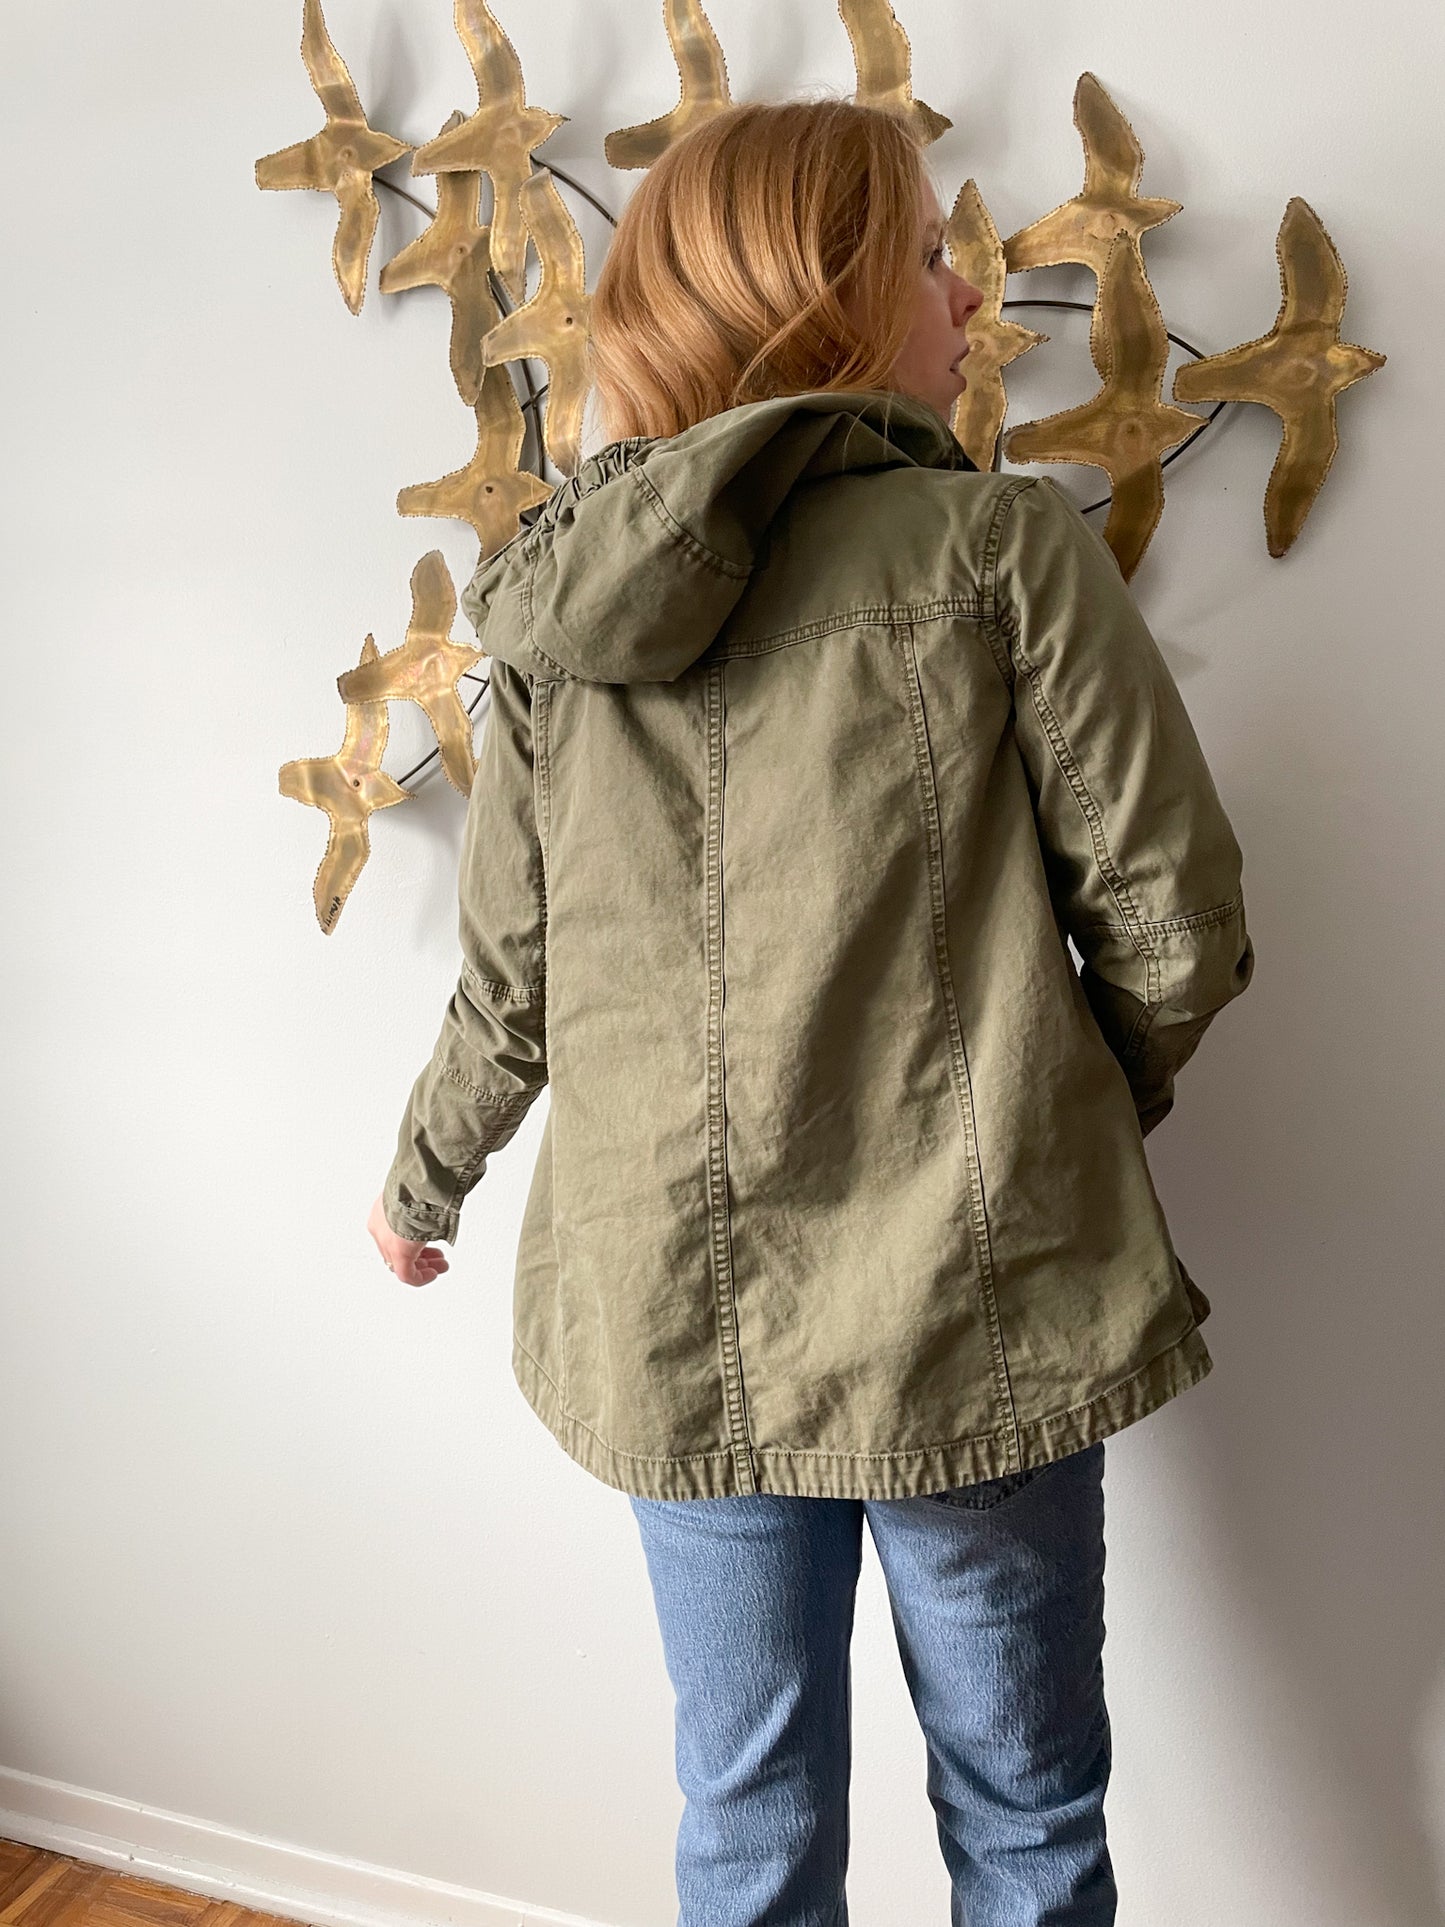 AE Olive Green Military Anorak Cotton Jacket - Small